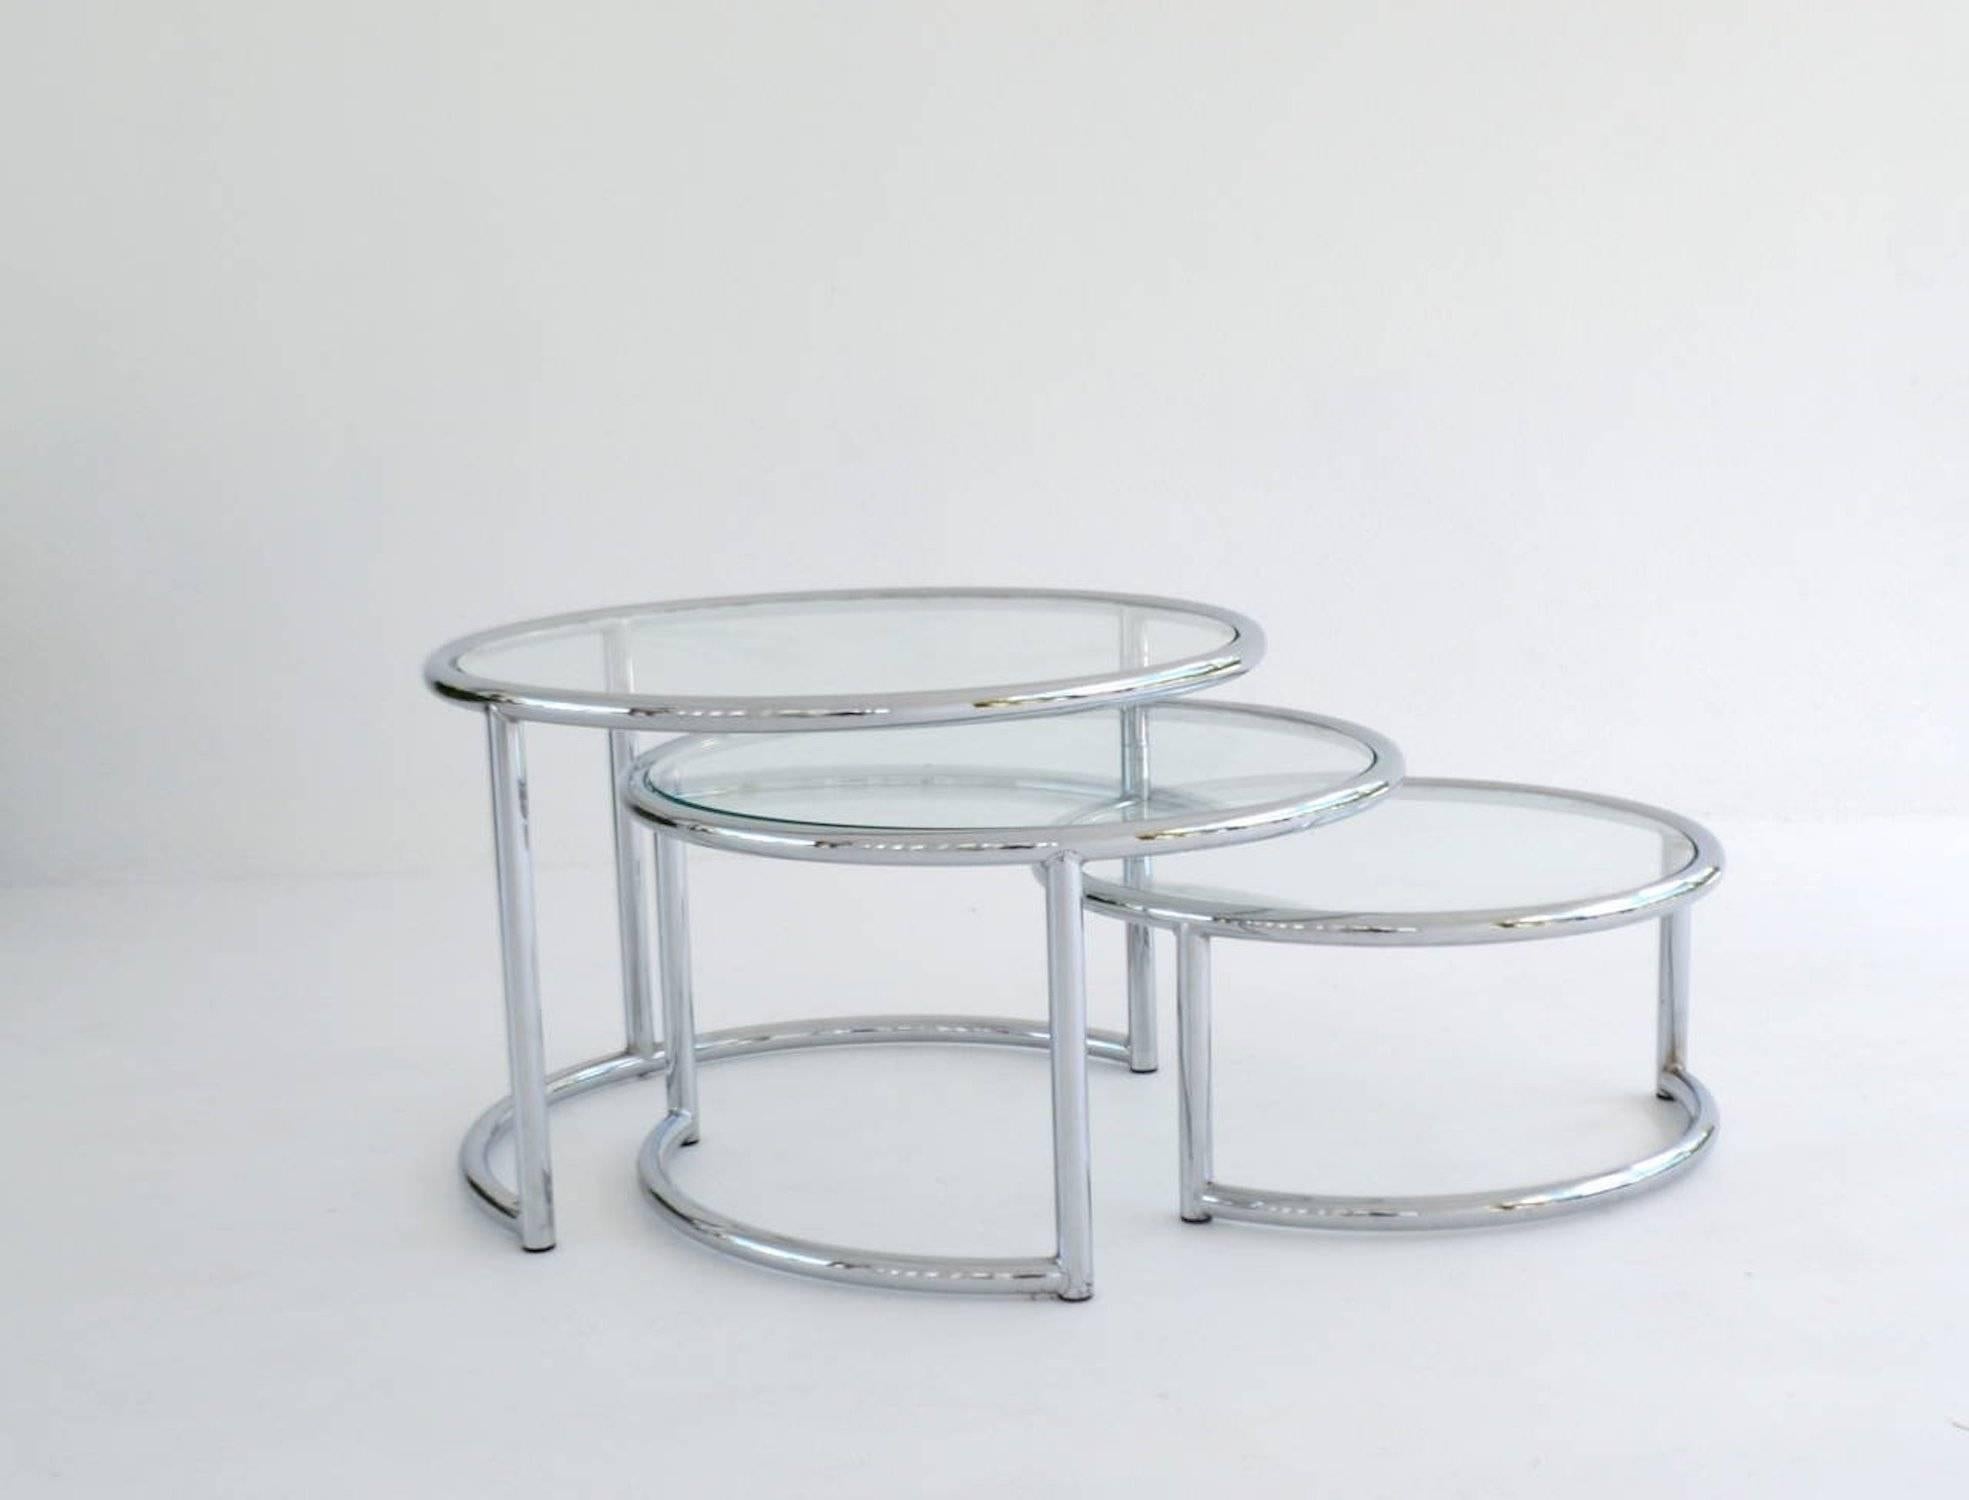 Midcentury Chrome Three-Tier Cocktail or Side Table In Good Condition For Sale In West Palm Beach, FL